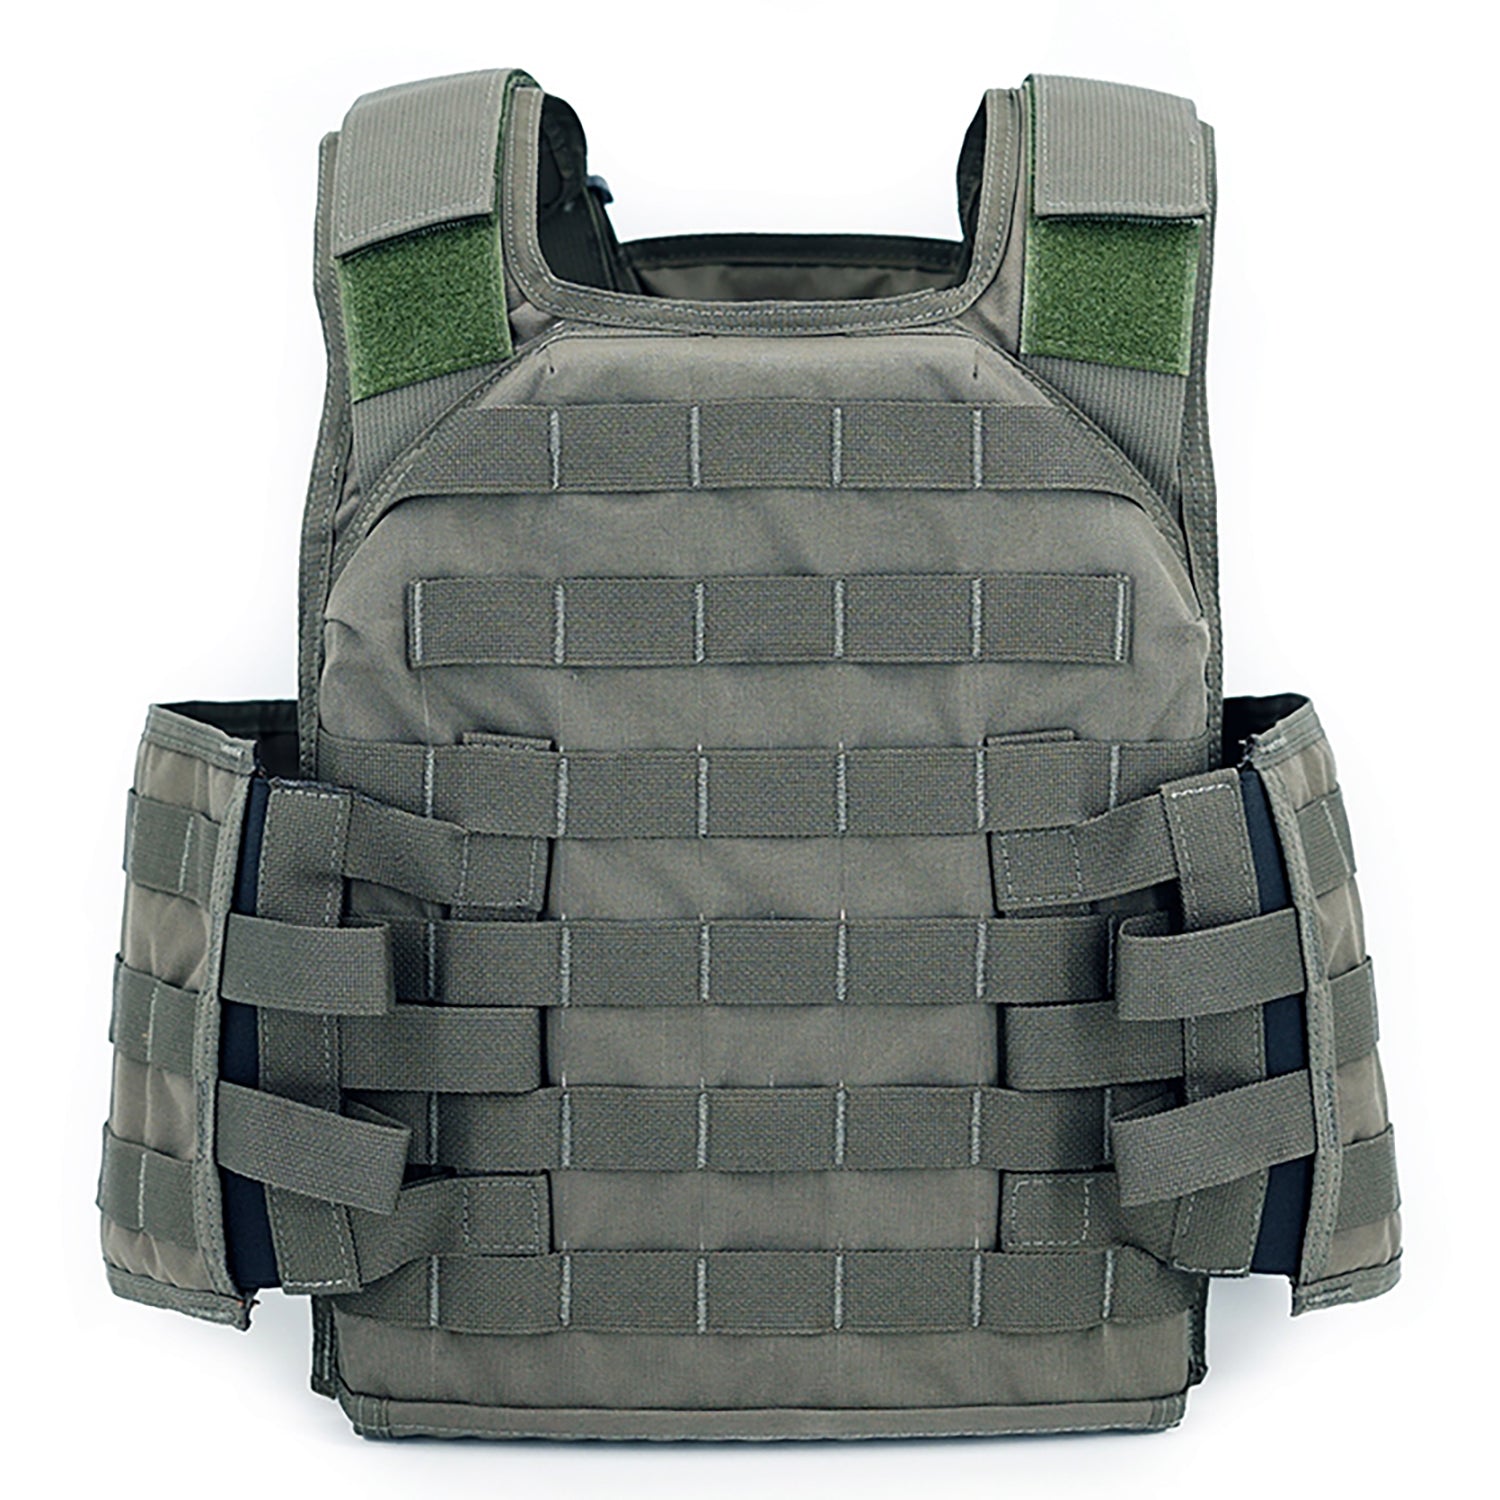 Delta force CAG tactical gear Paraclete HPC plate carrier smoke green